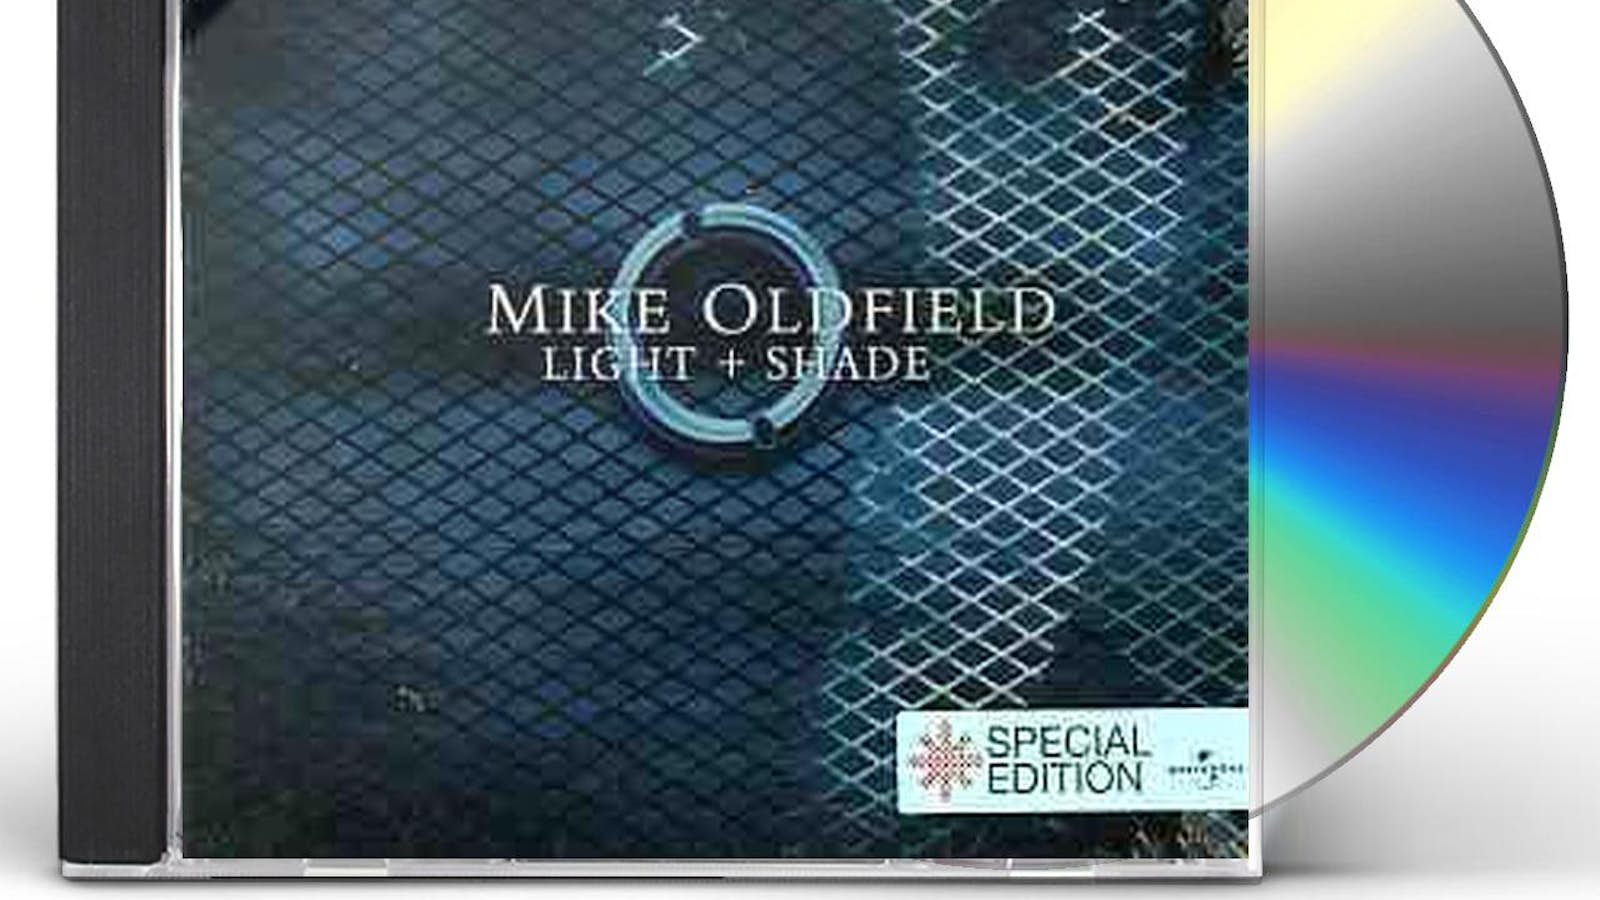 amme Andet Glat Mike Oldfield LIGHT & SHADE CD